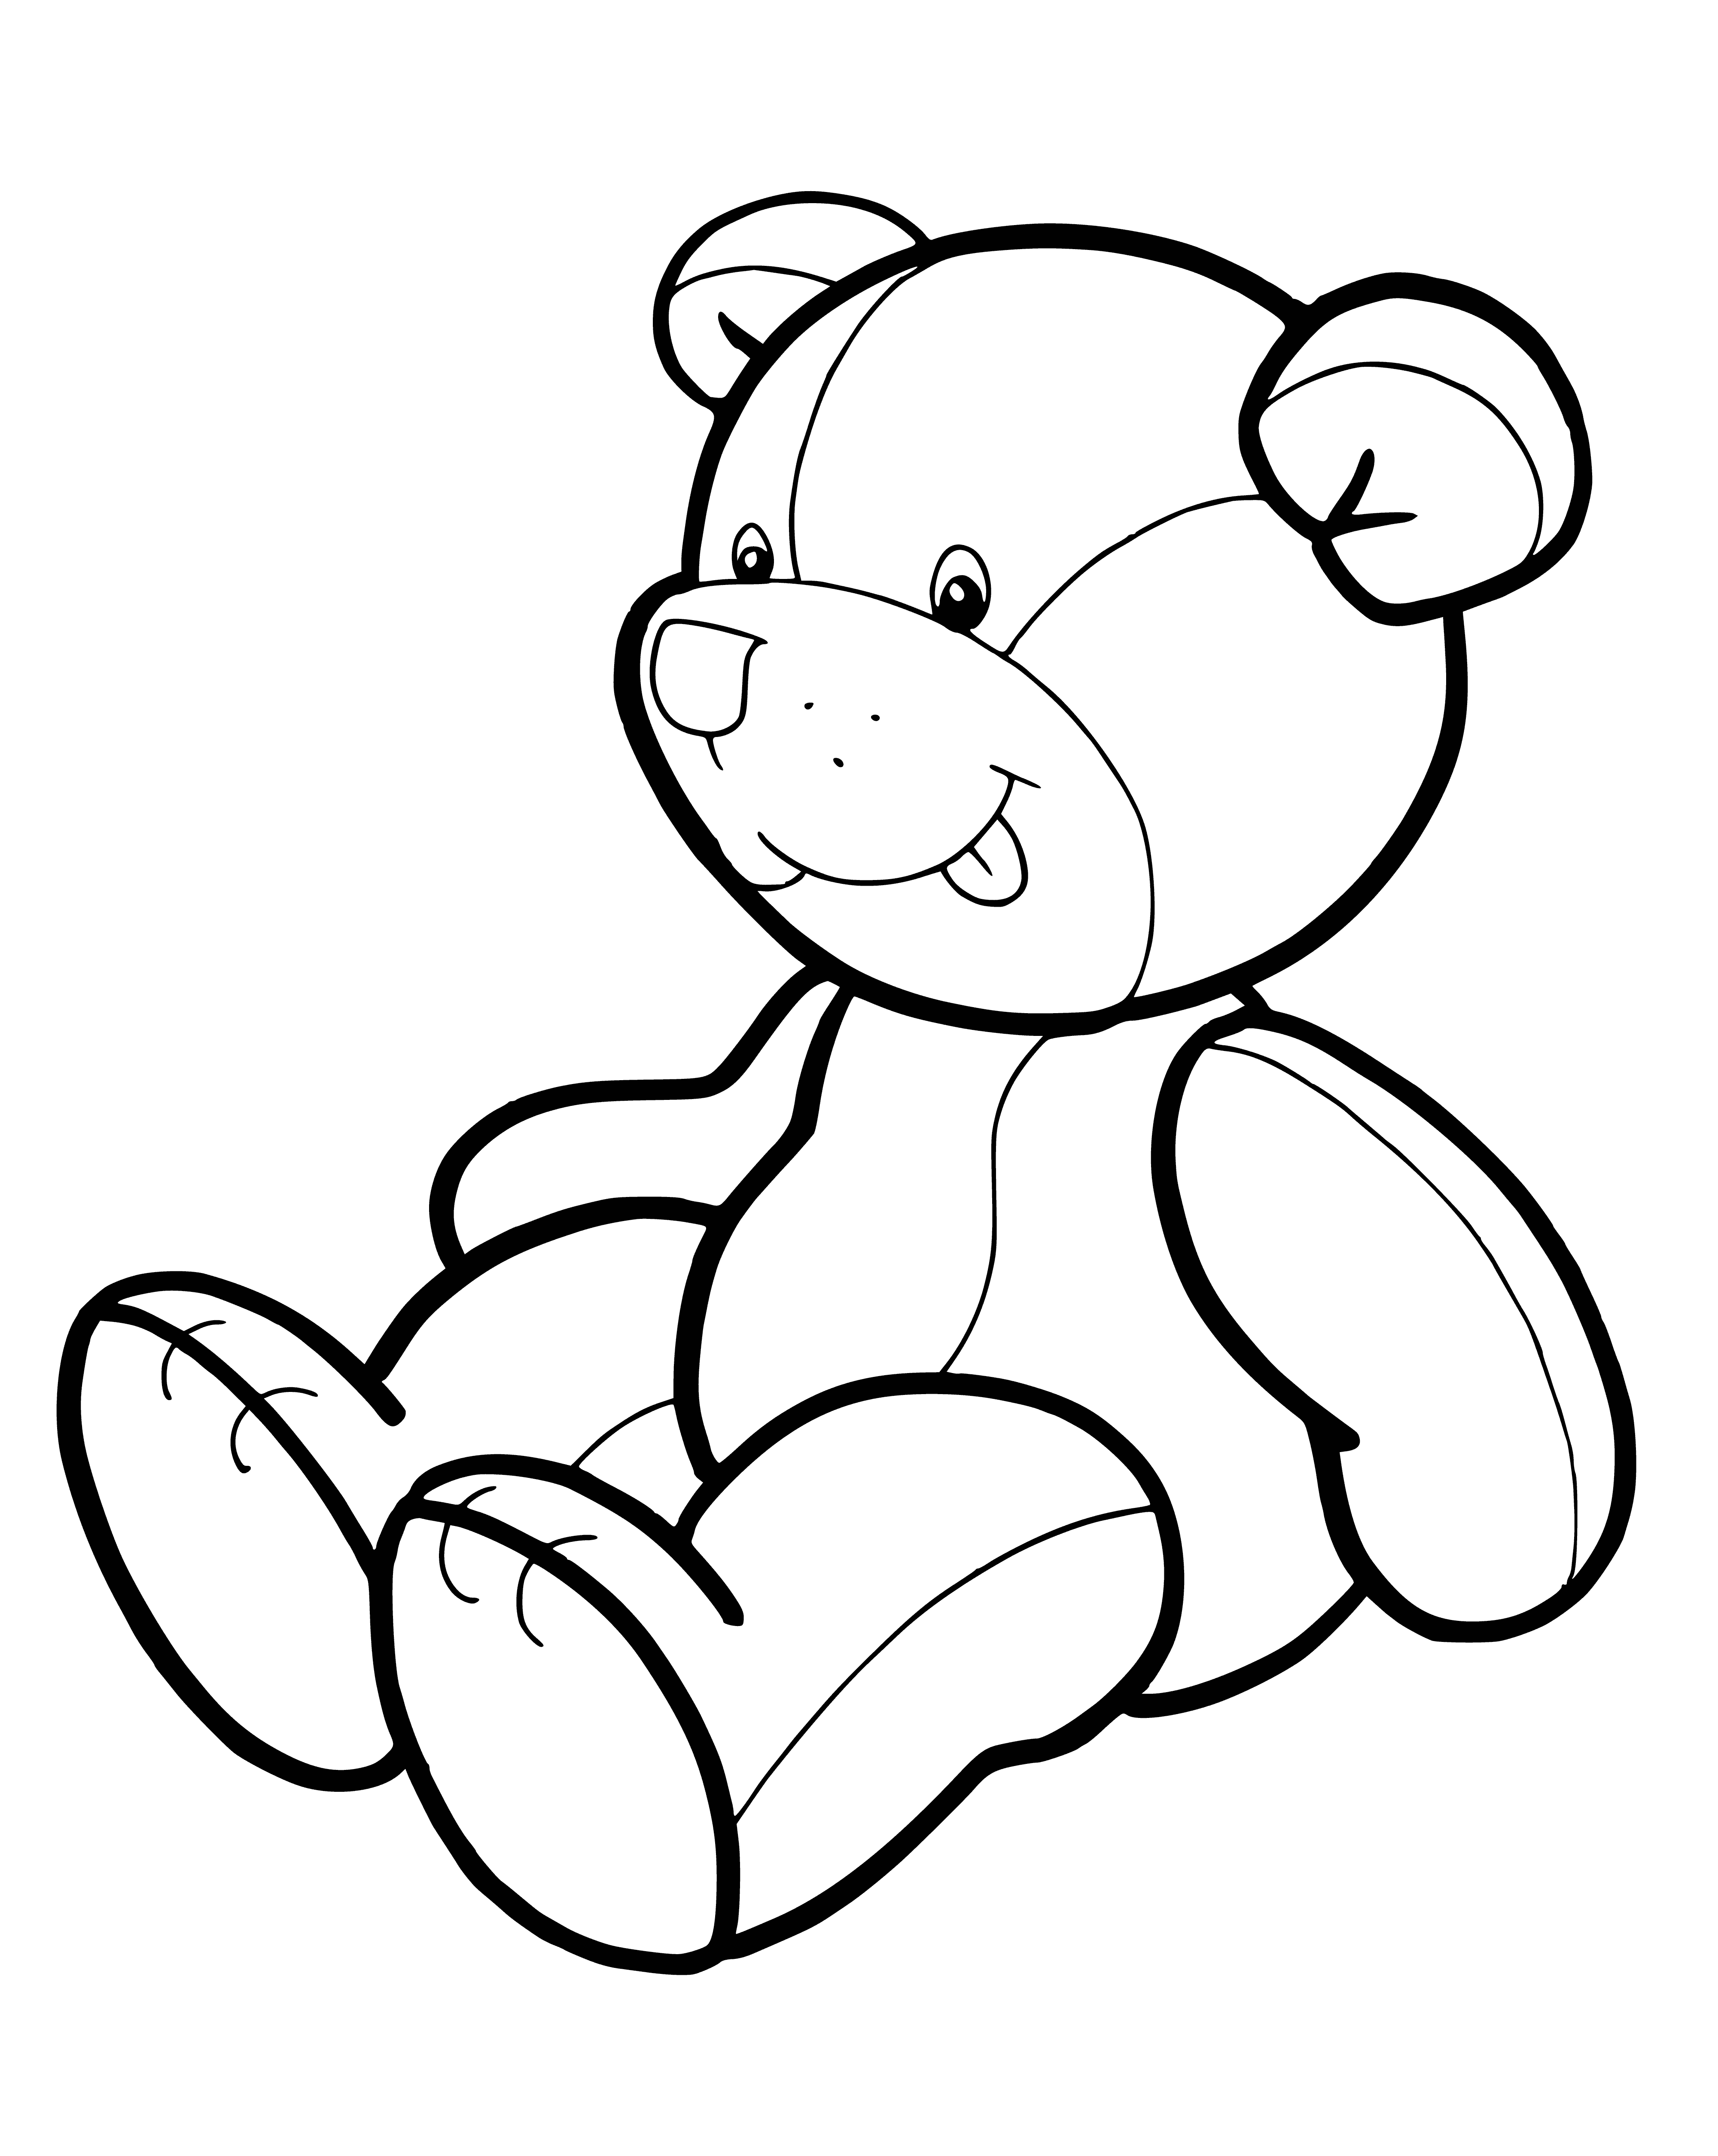 coloring page: Small, brown Teddy bear has big black eyes, small black nose, brown and black ears, two paws.